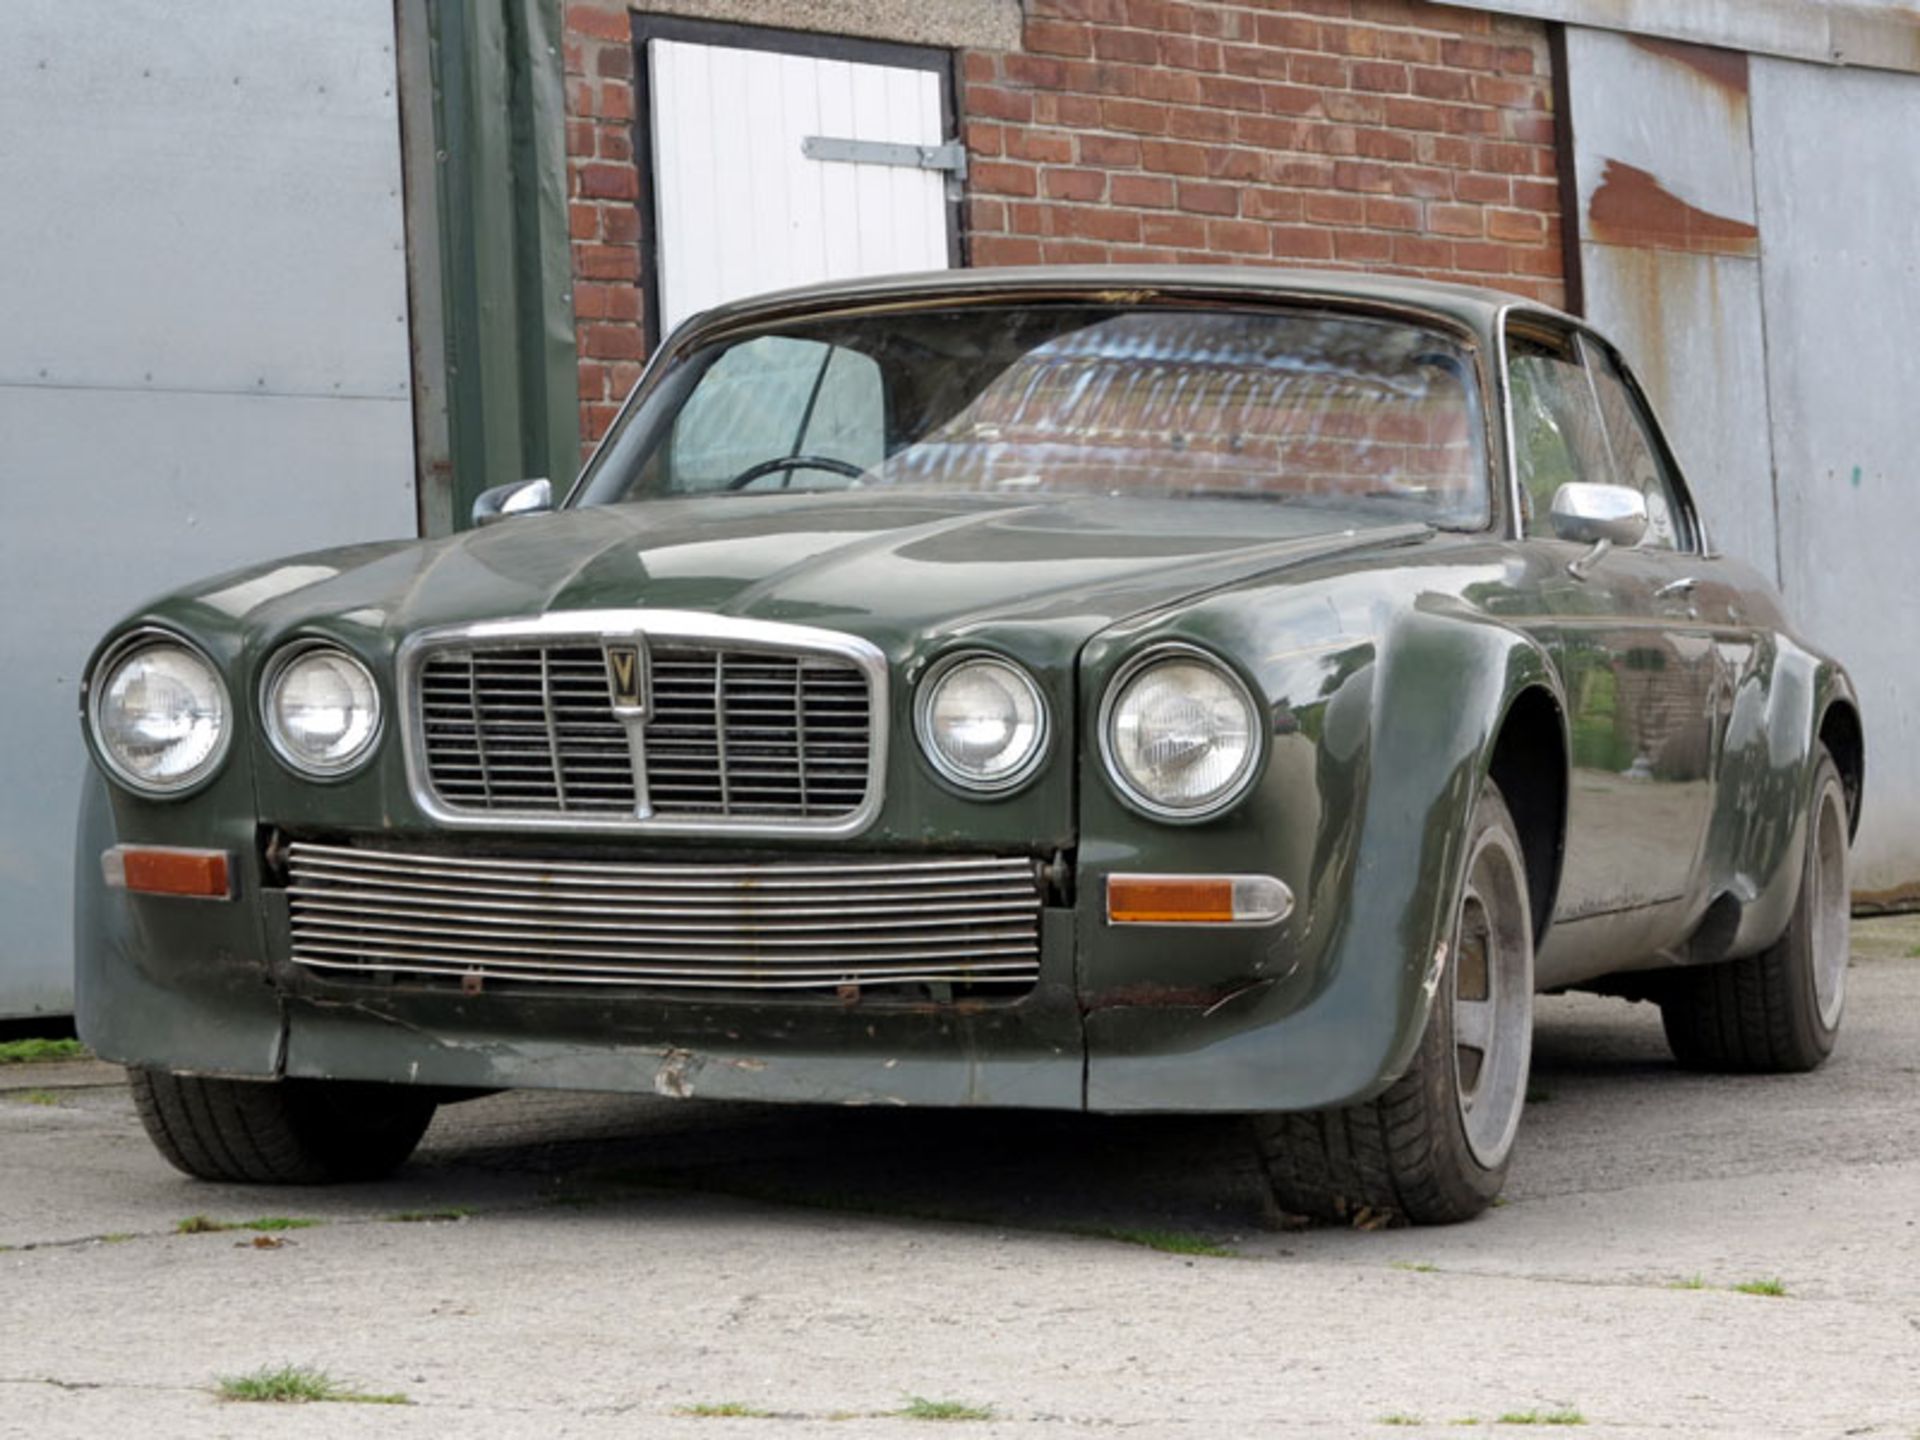 - John Steed's famous mount in 'The New Avengers' TV series

- The eighth XJ-C 12 made and